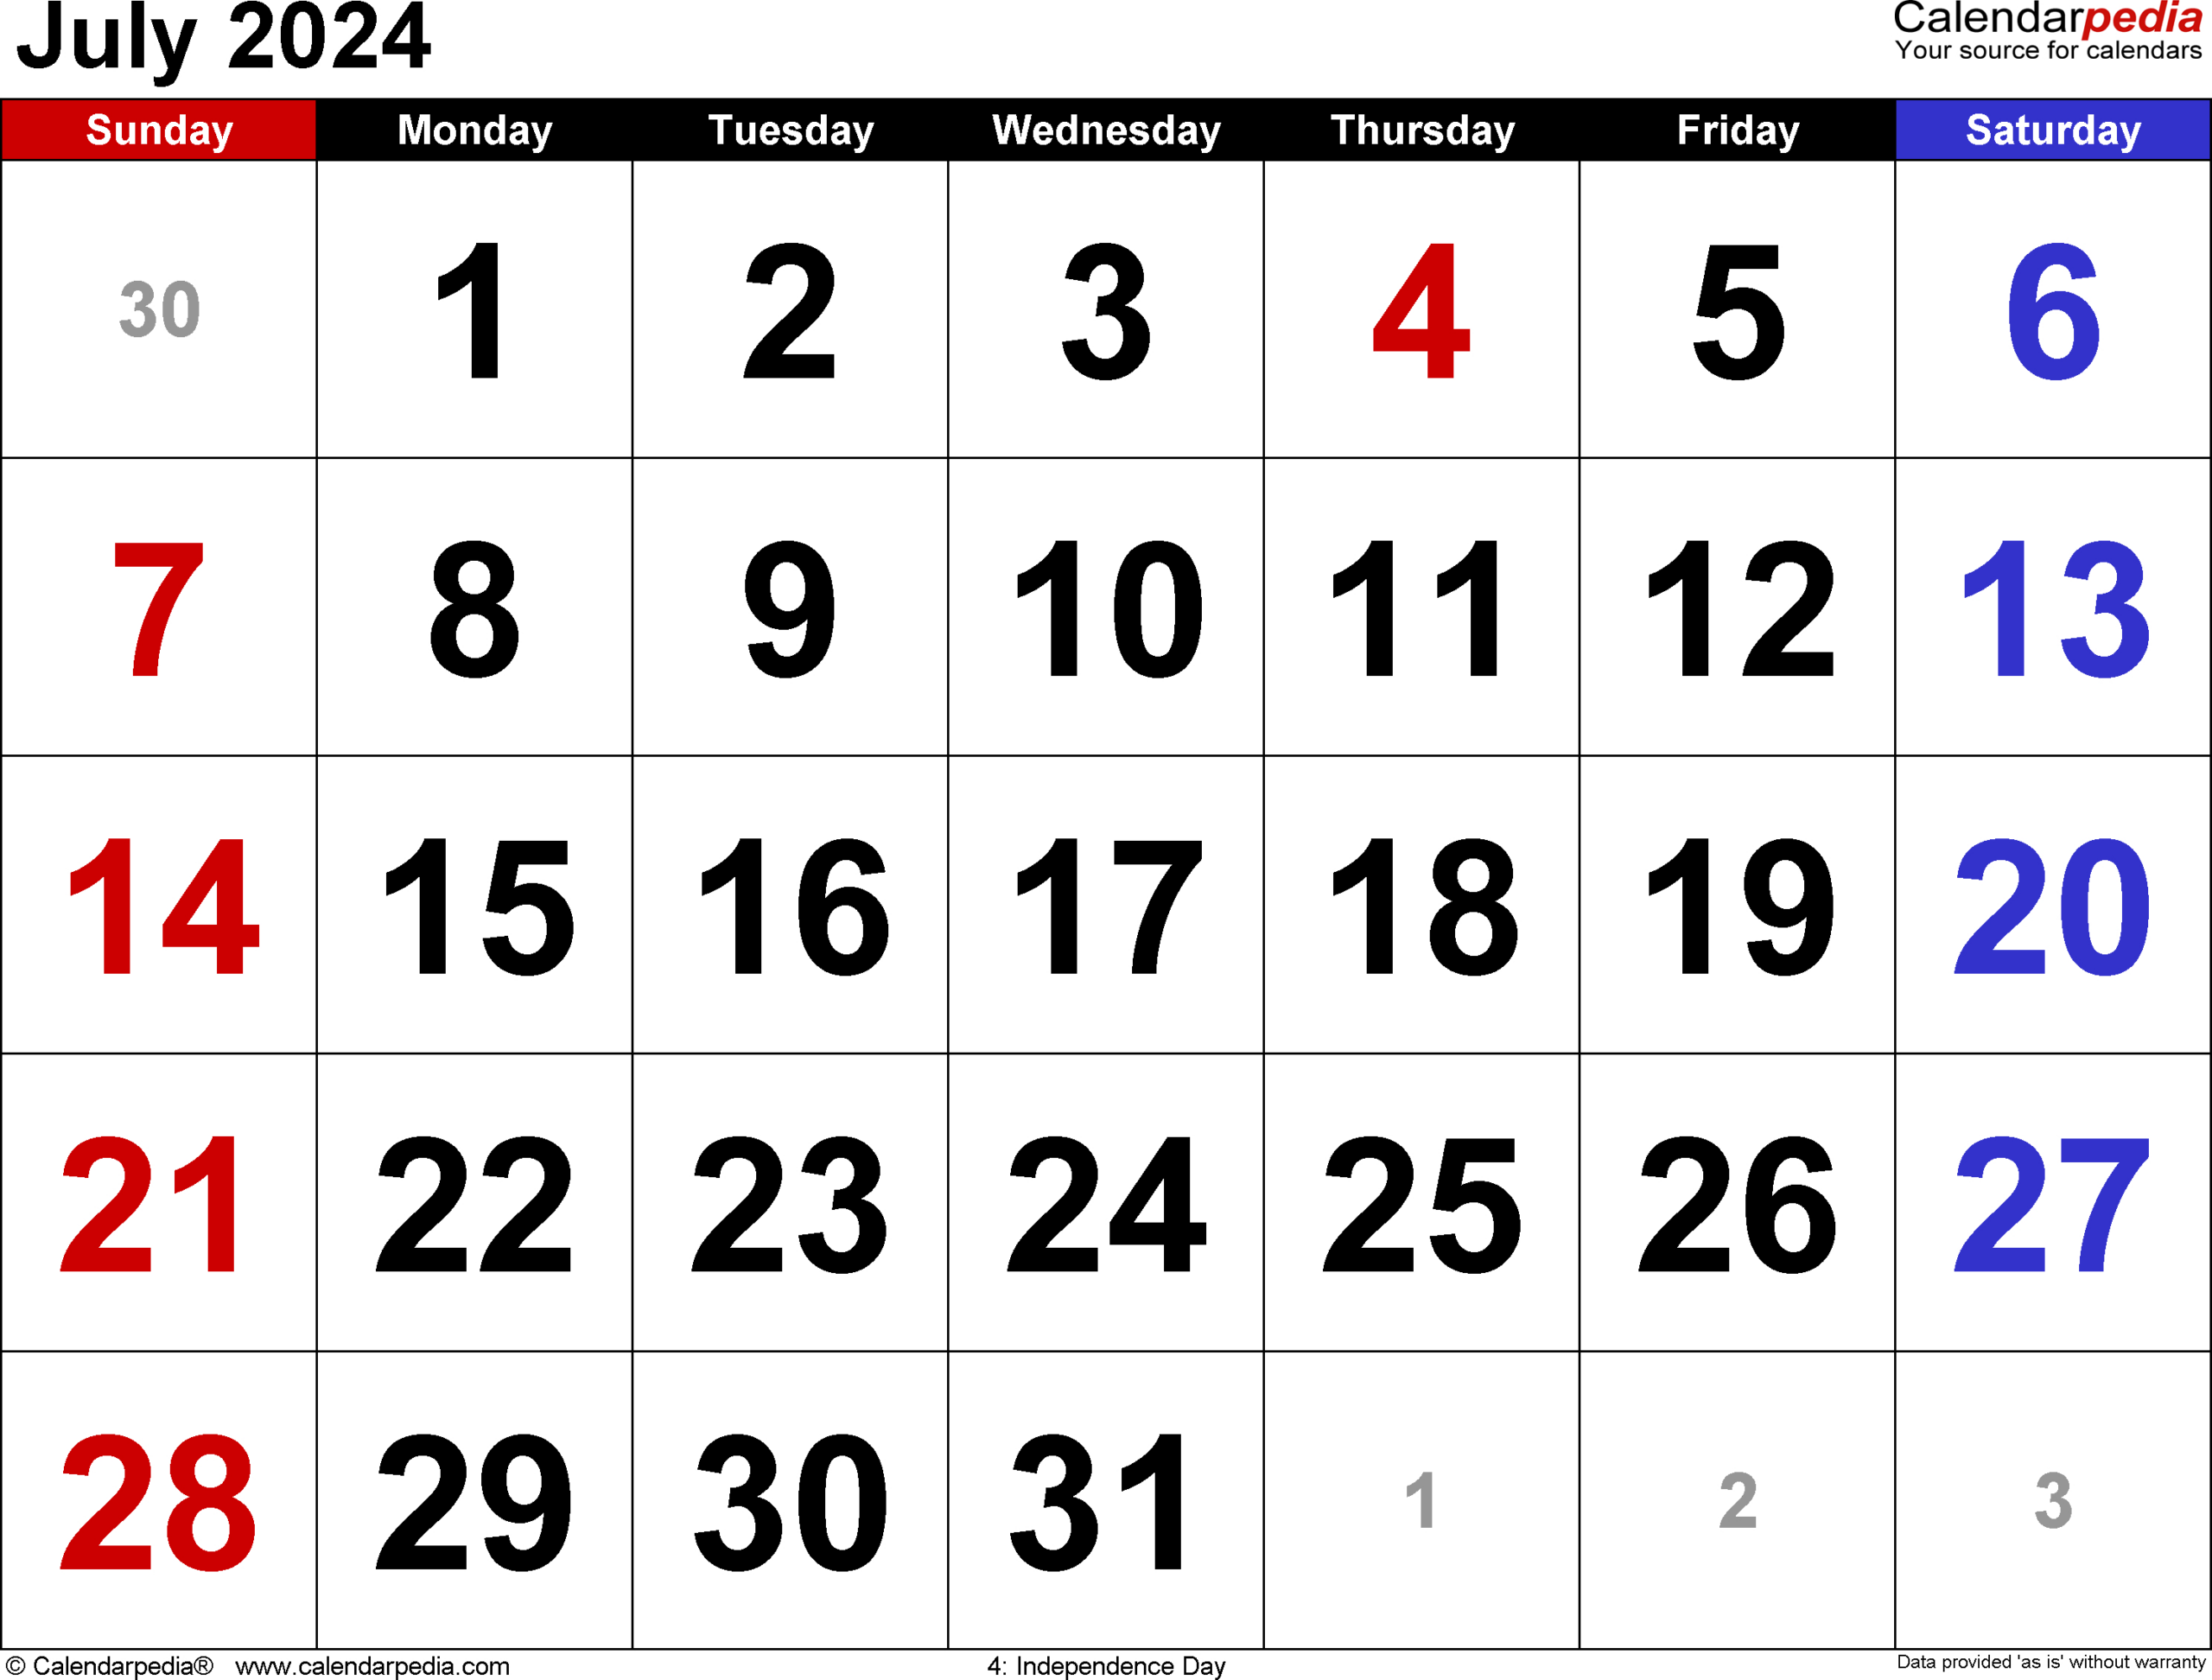 July 2024 Calendar | Templates For Word, Excel And Pdf with regard to July 2024 Calendar Word Template